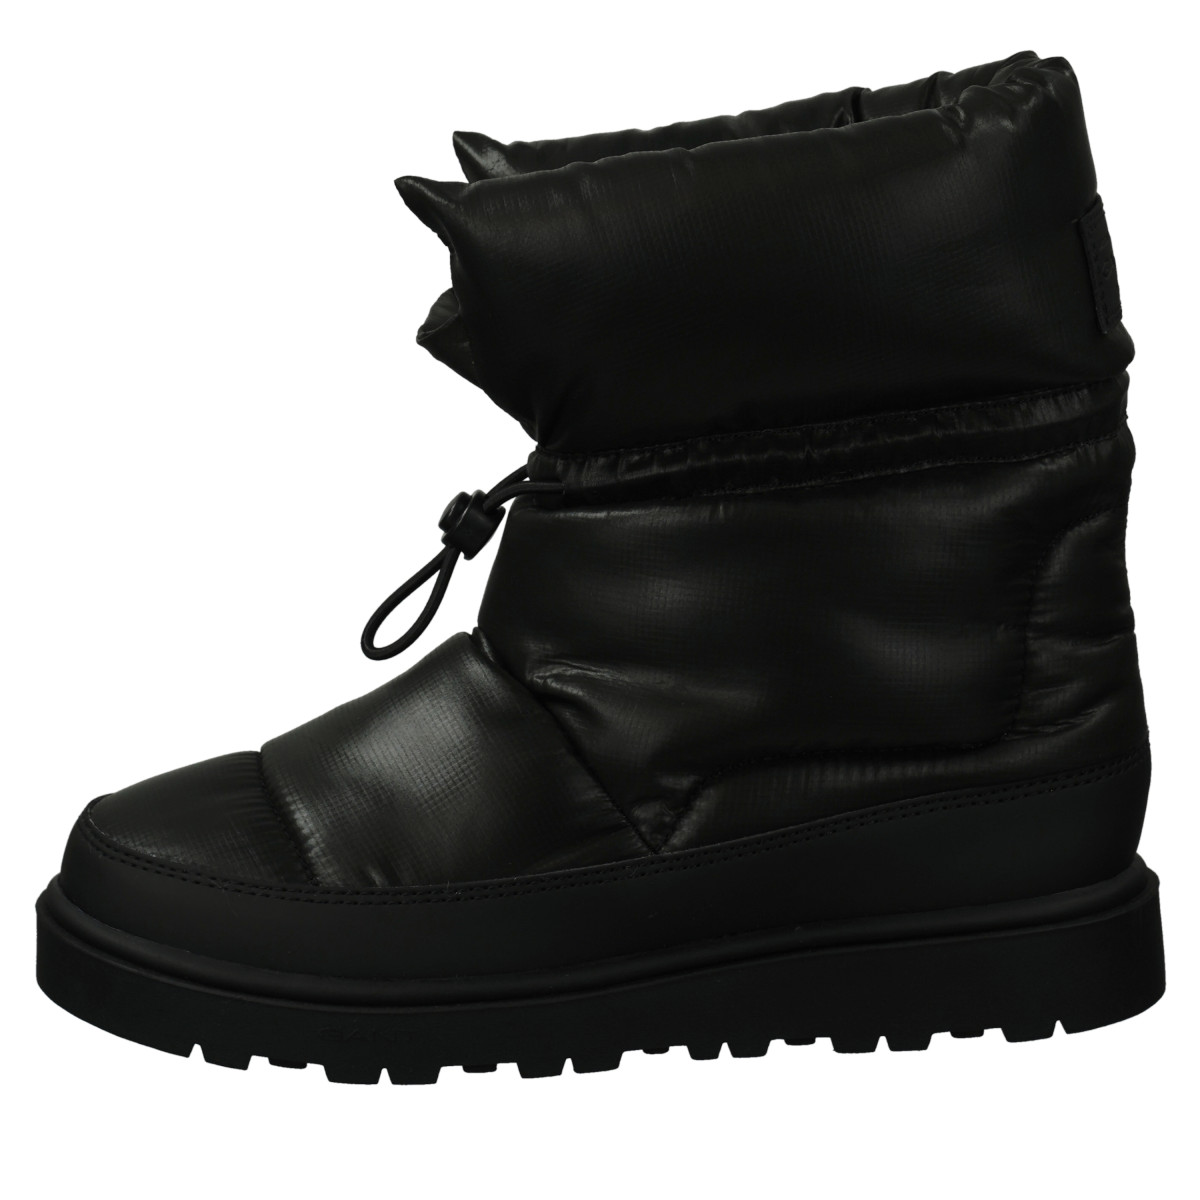 Stiefel "Sannly"